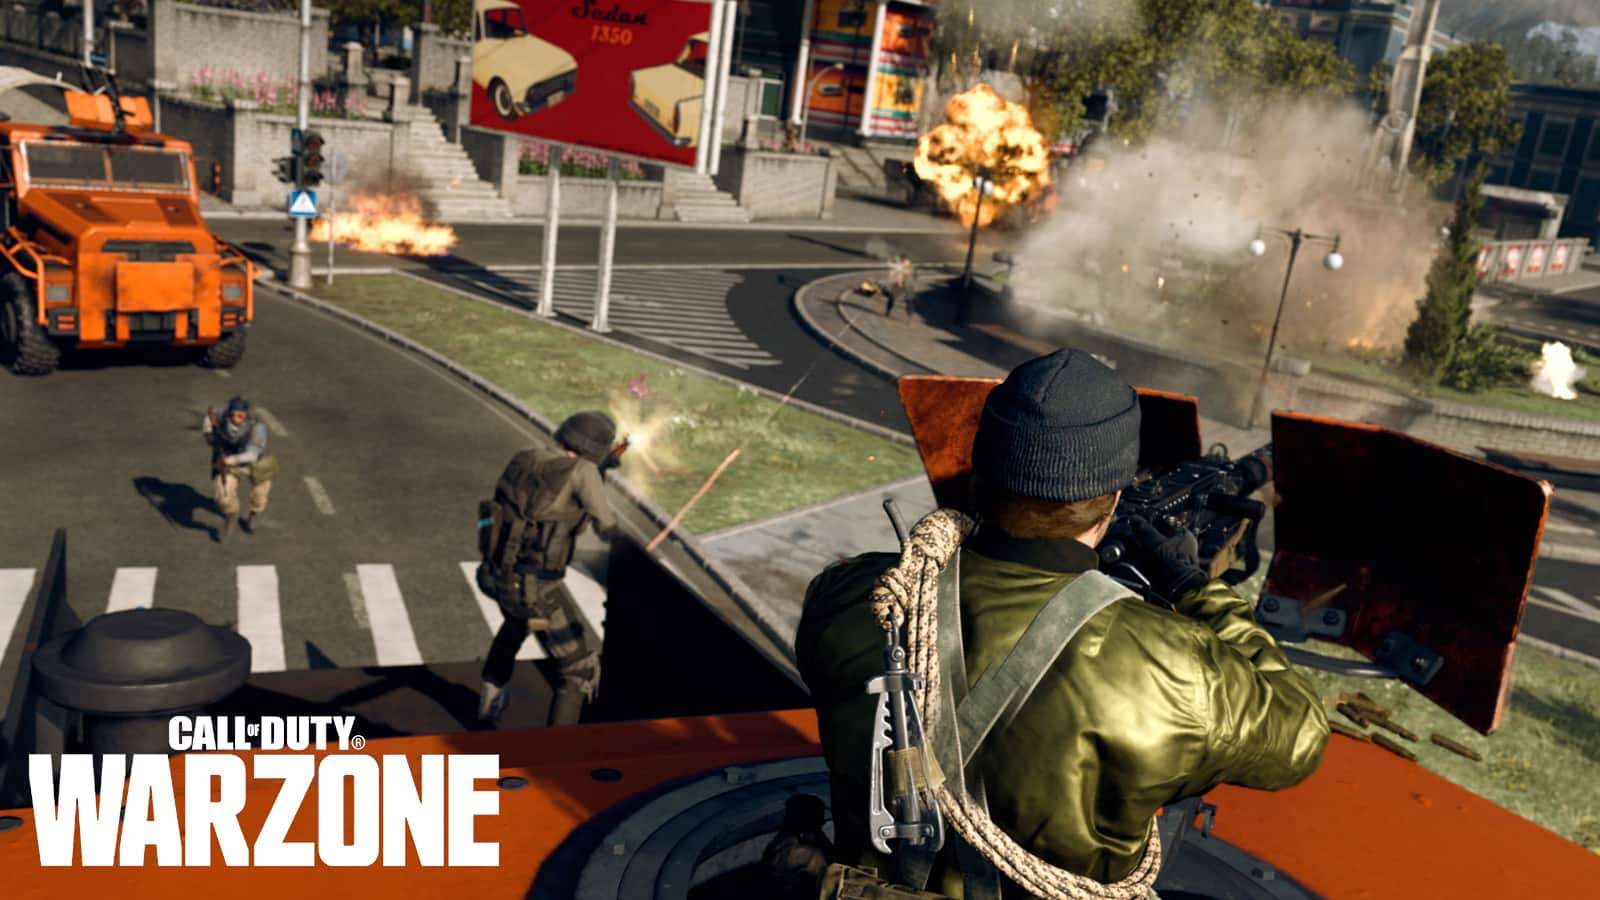 Call Of Duty Warzone - Discover The Story Of The Saga Of This Game